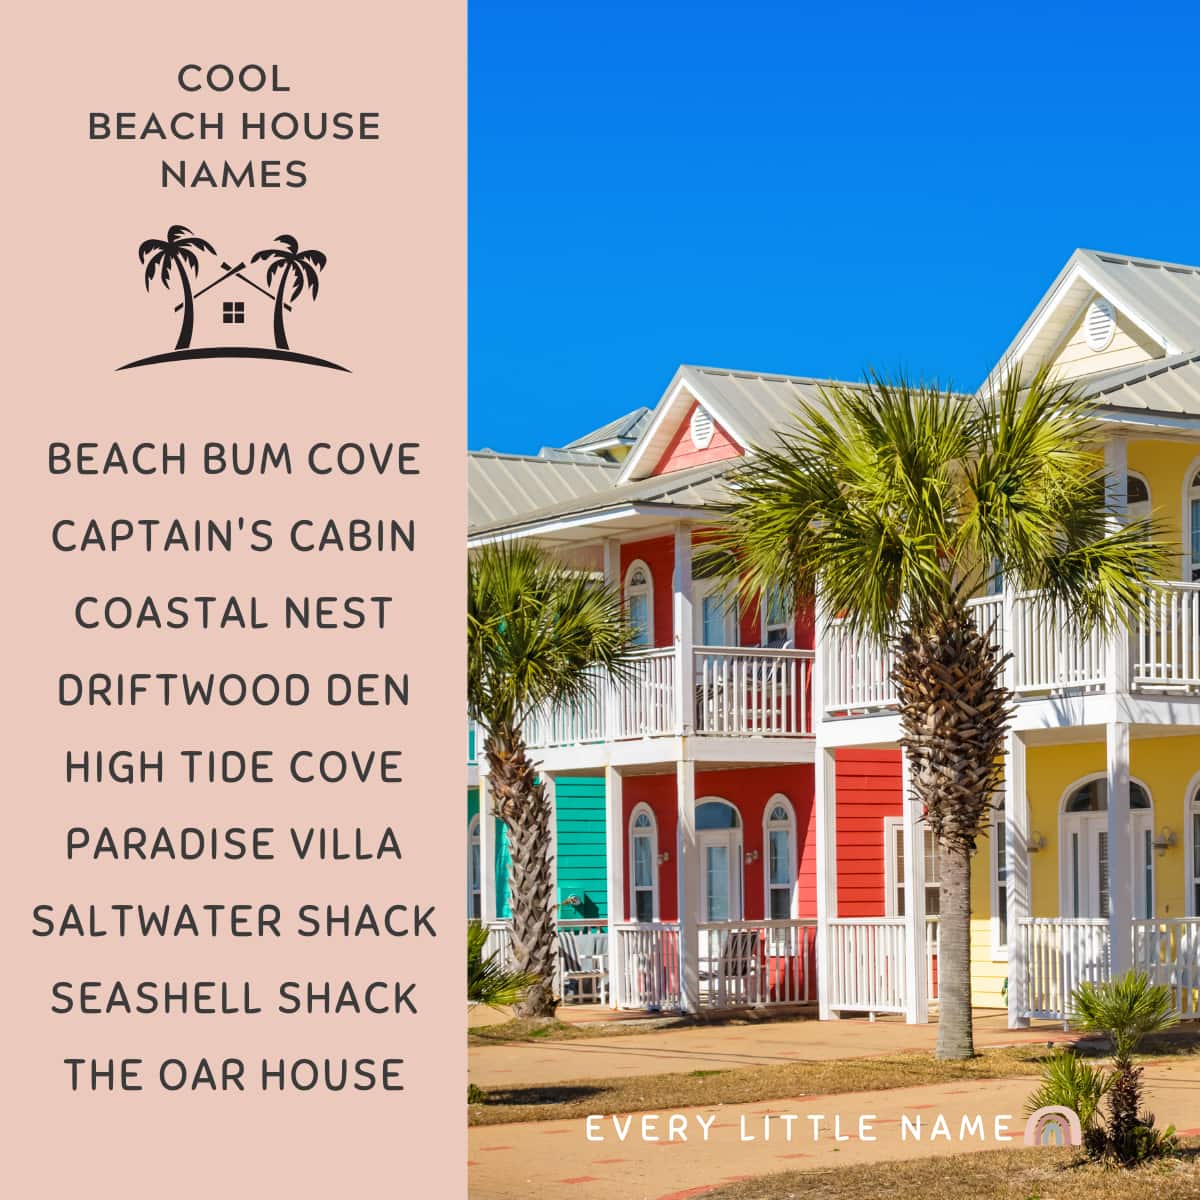 Row of colorful houses and list of cool beach house names.